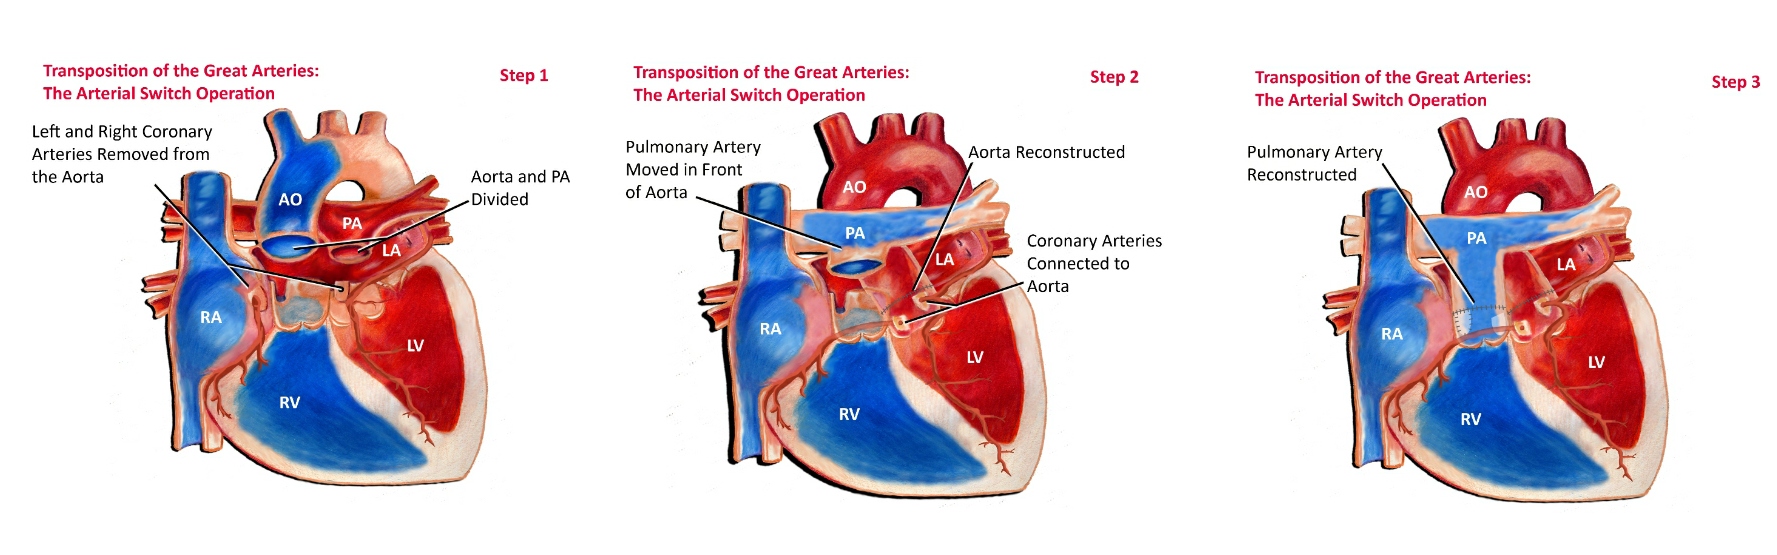 arterial switch operation